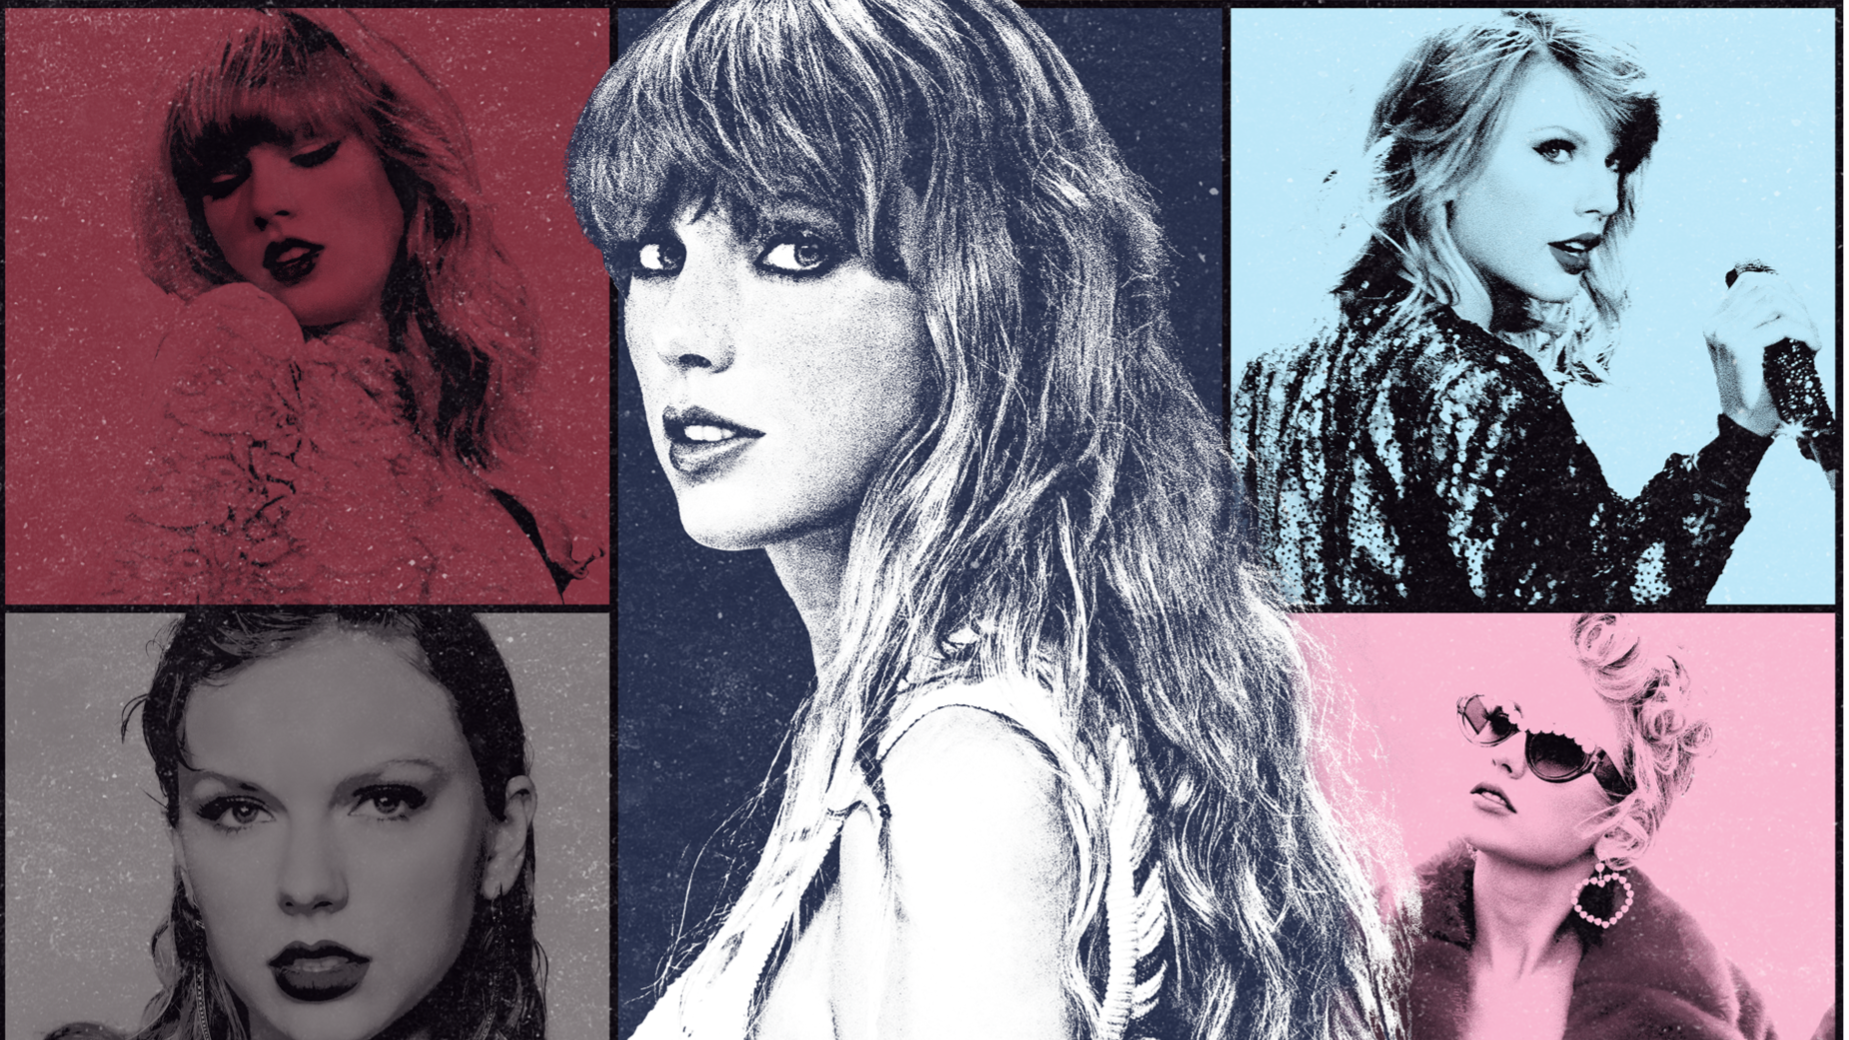 Taylor Swift The Eras Tour: Dates, Ticket Prices, Openers, On Sale Info, And Everything We Know So Far